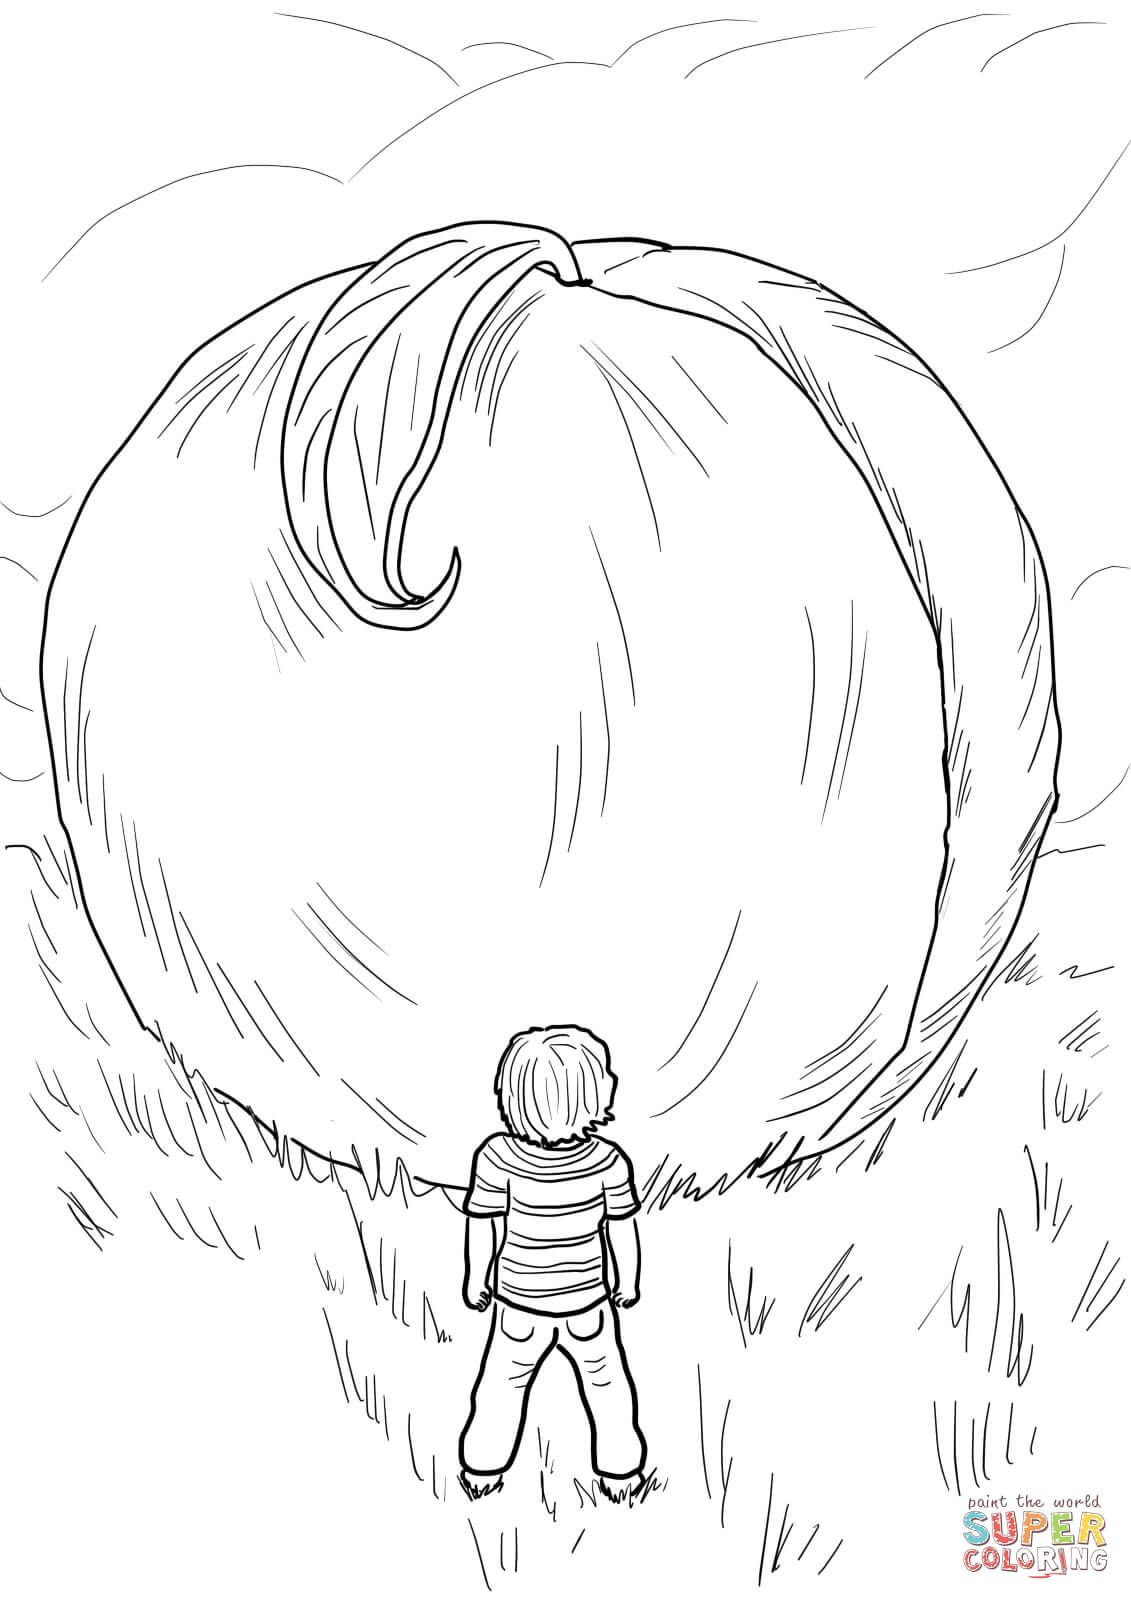 James and the giant peach coloring page free printable coloring pages the giant peach james and giant peach peach art